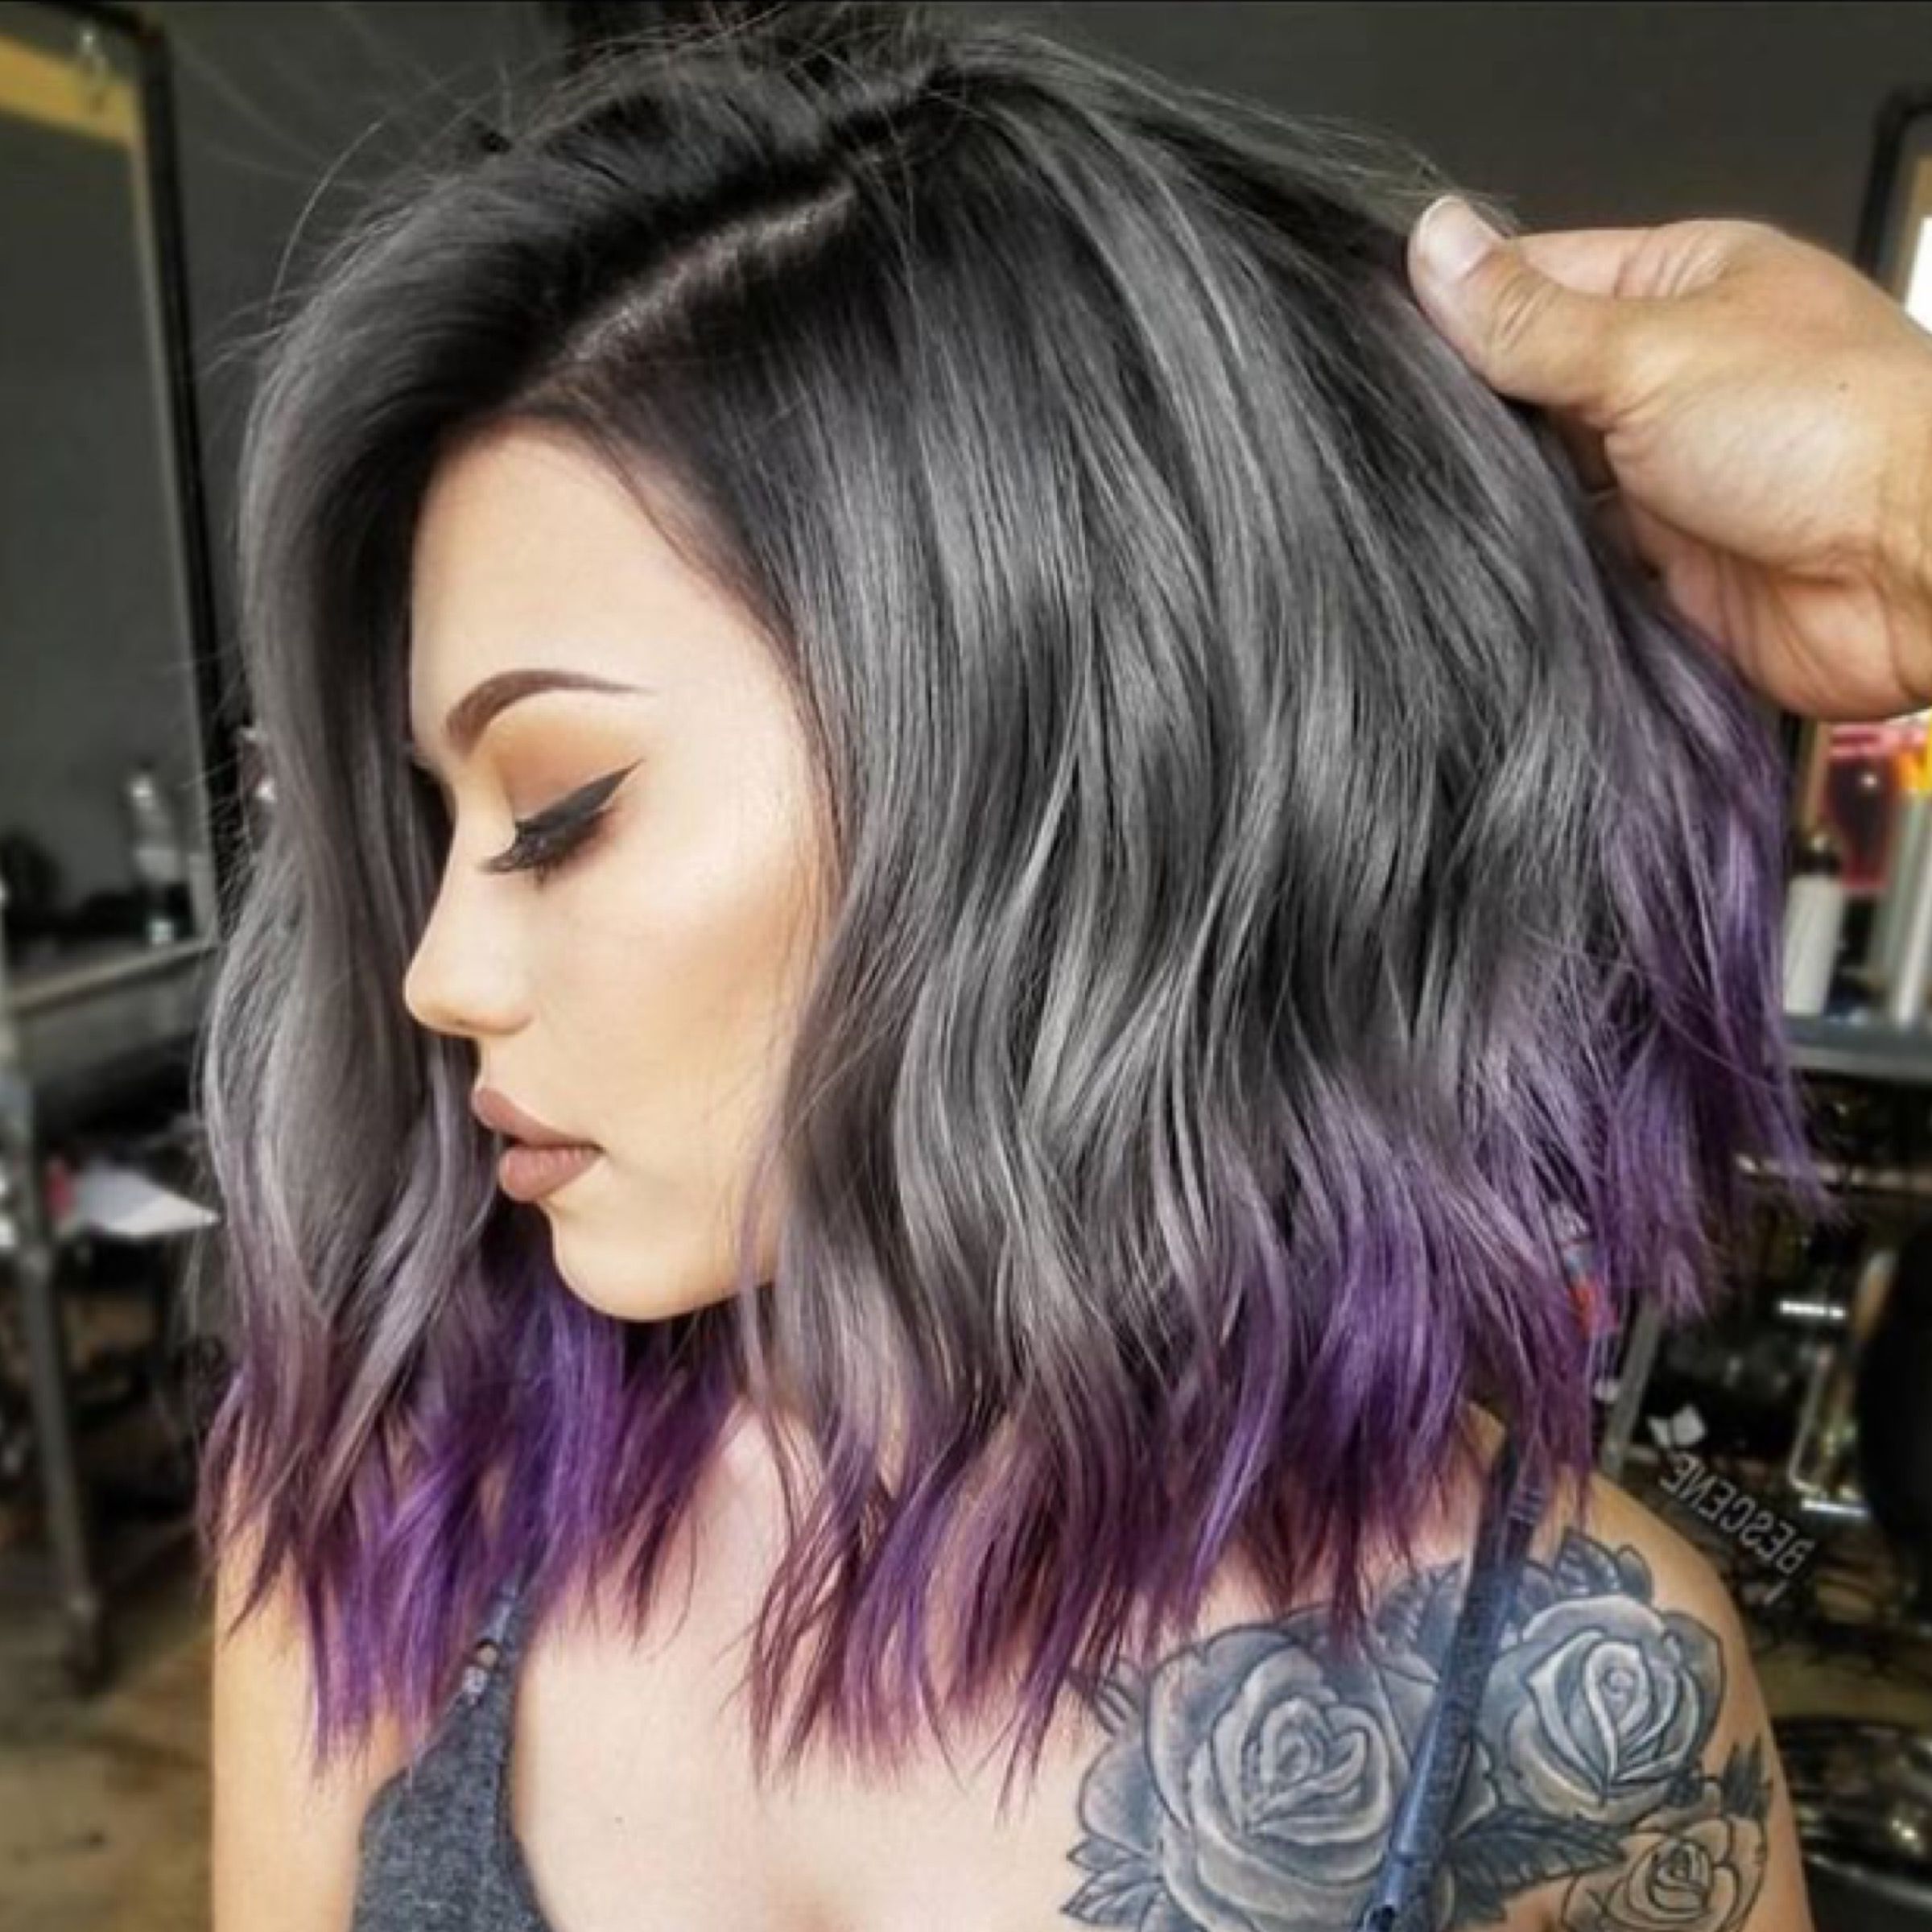 Hairstyles : Denim Blue Hair Ombre Spectacular Fashion Brown Pertaining To Widely Used Ravishing Smoky Purple Ombre Hairstyles (View 20 of 20)